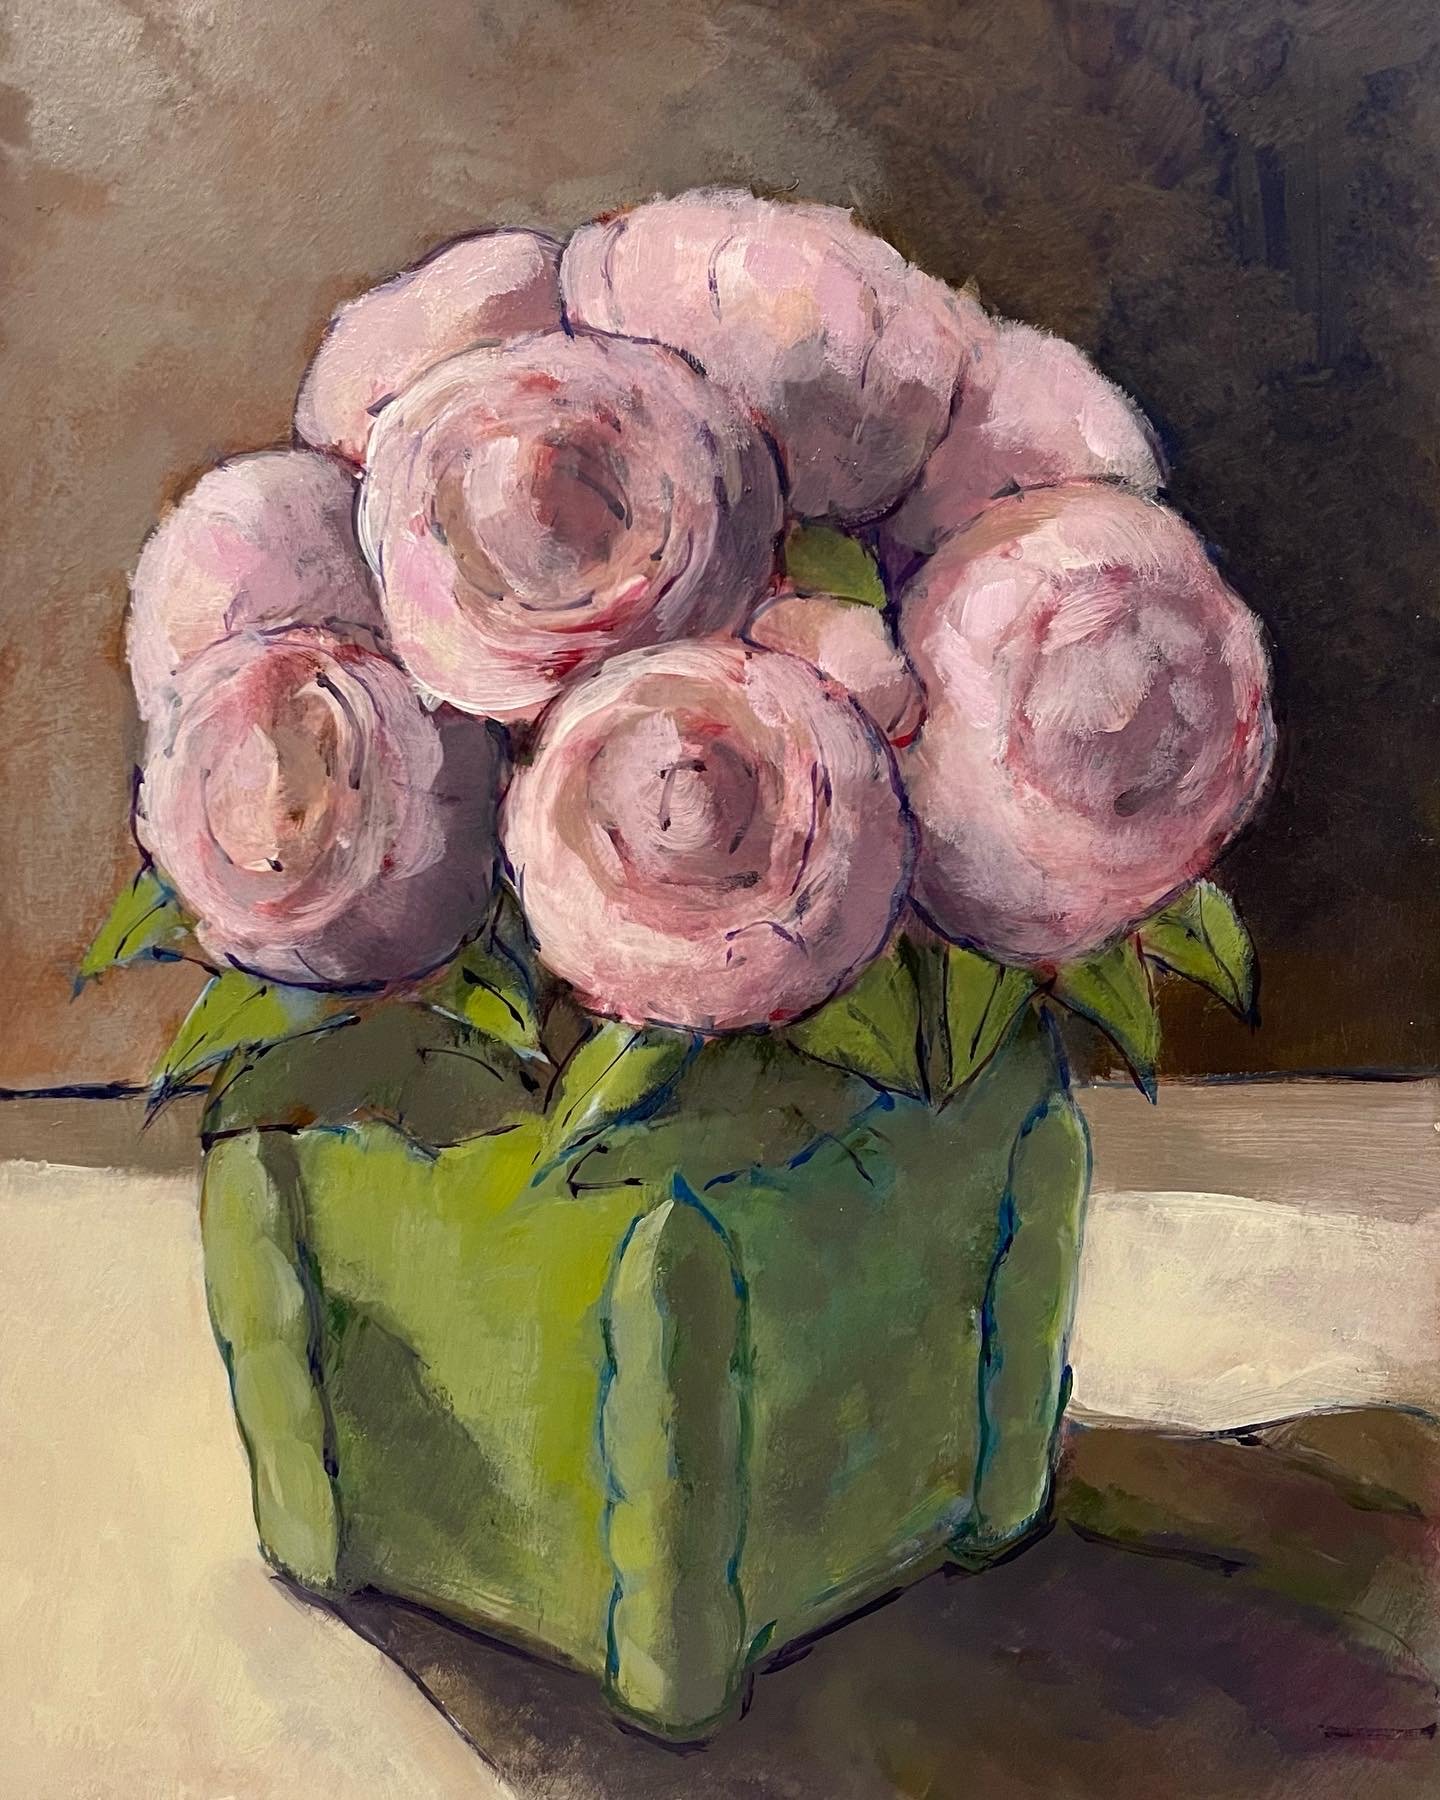 Peonies, Oil on Panel, 9 by 12 inches inches, 2022.